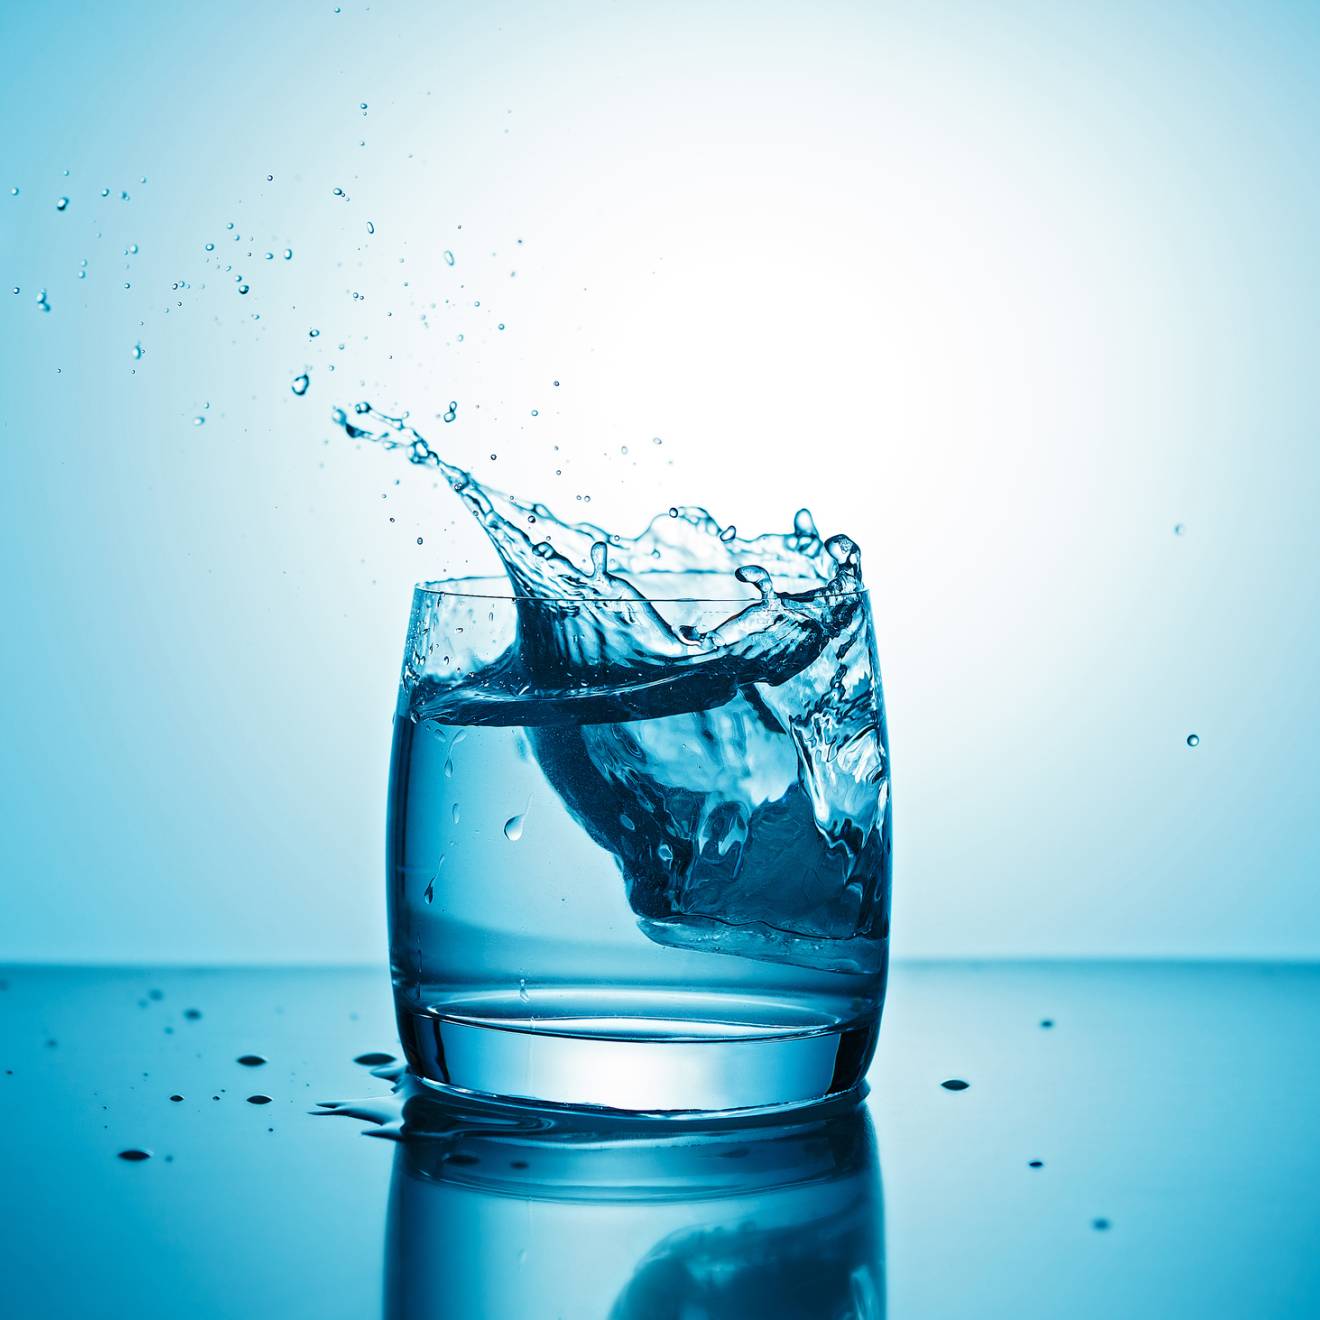 A glass of water with some water splashing out on a blue background